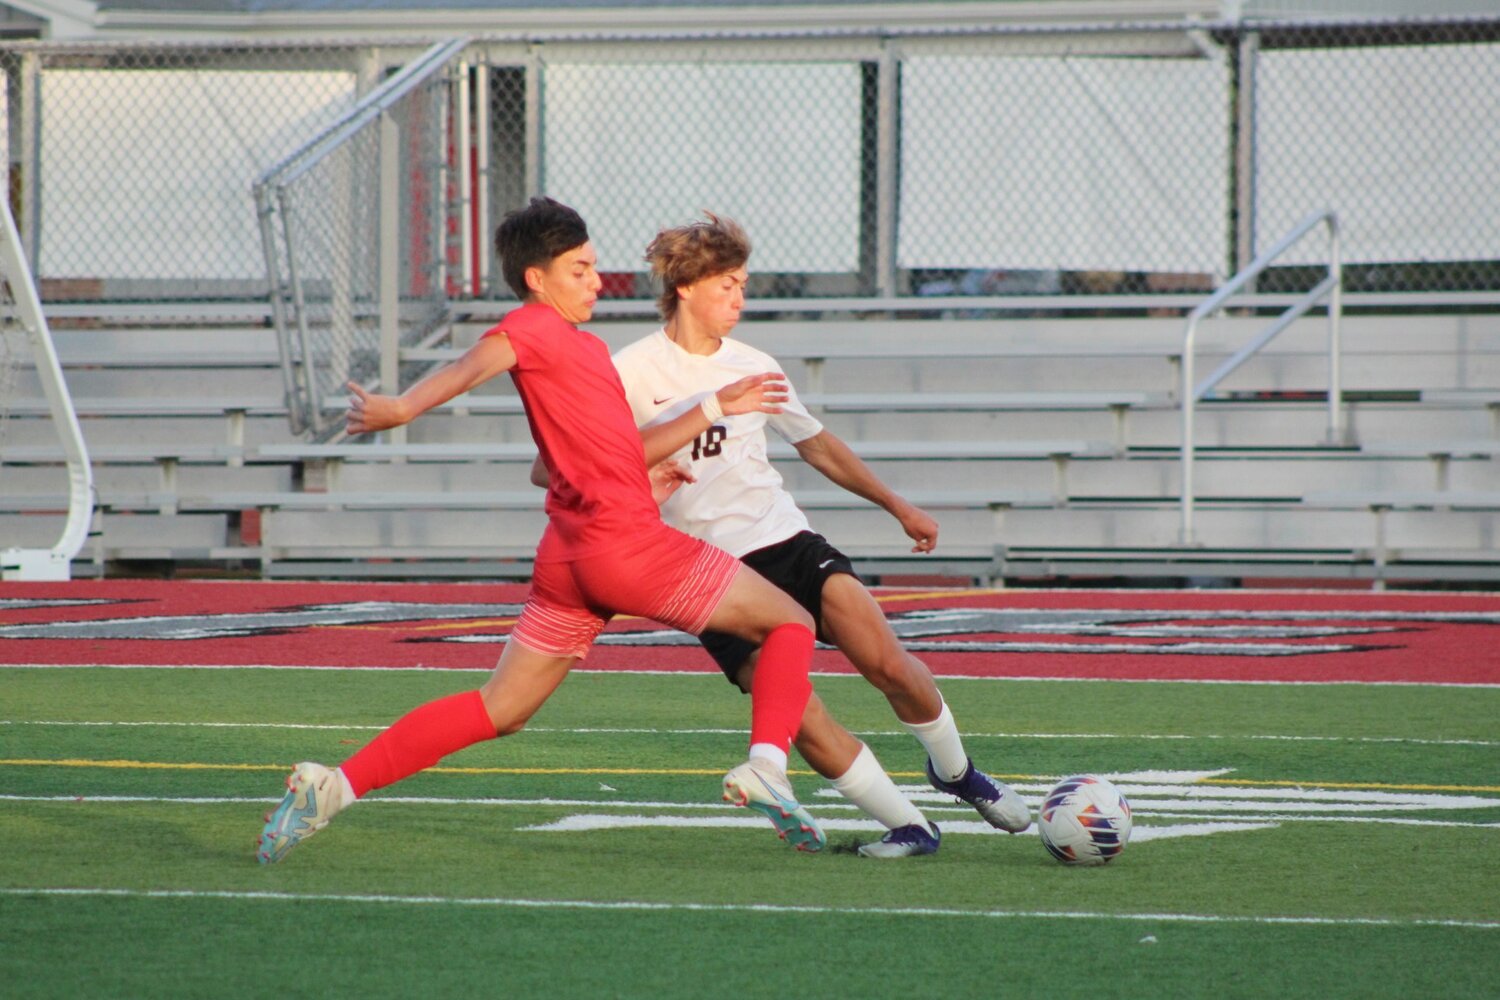 Sam Becerril scored the lone goal for the Southmont boys.